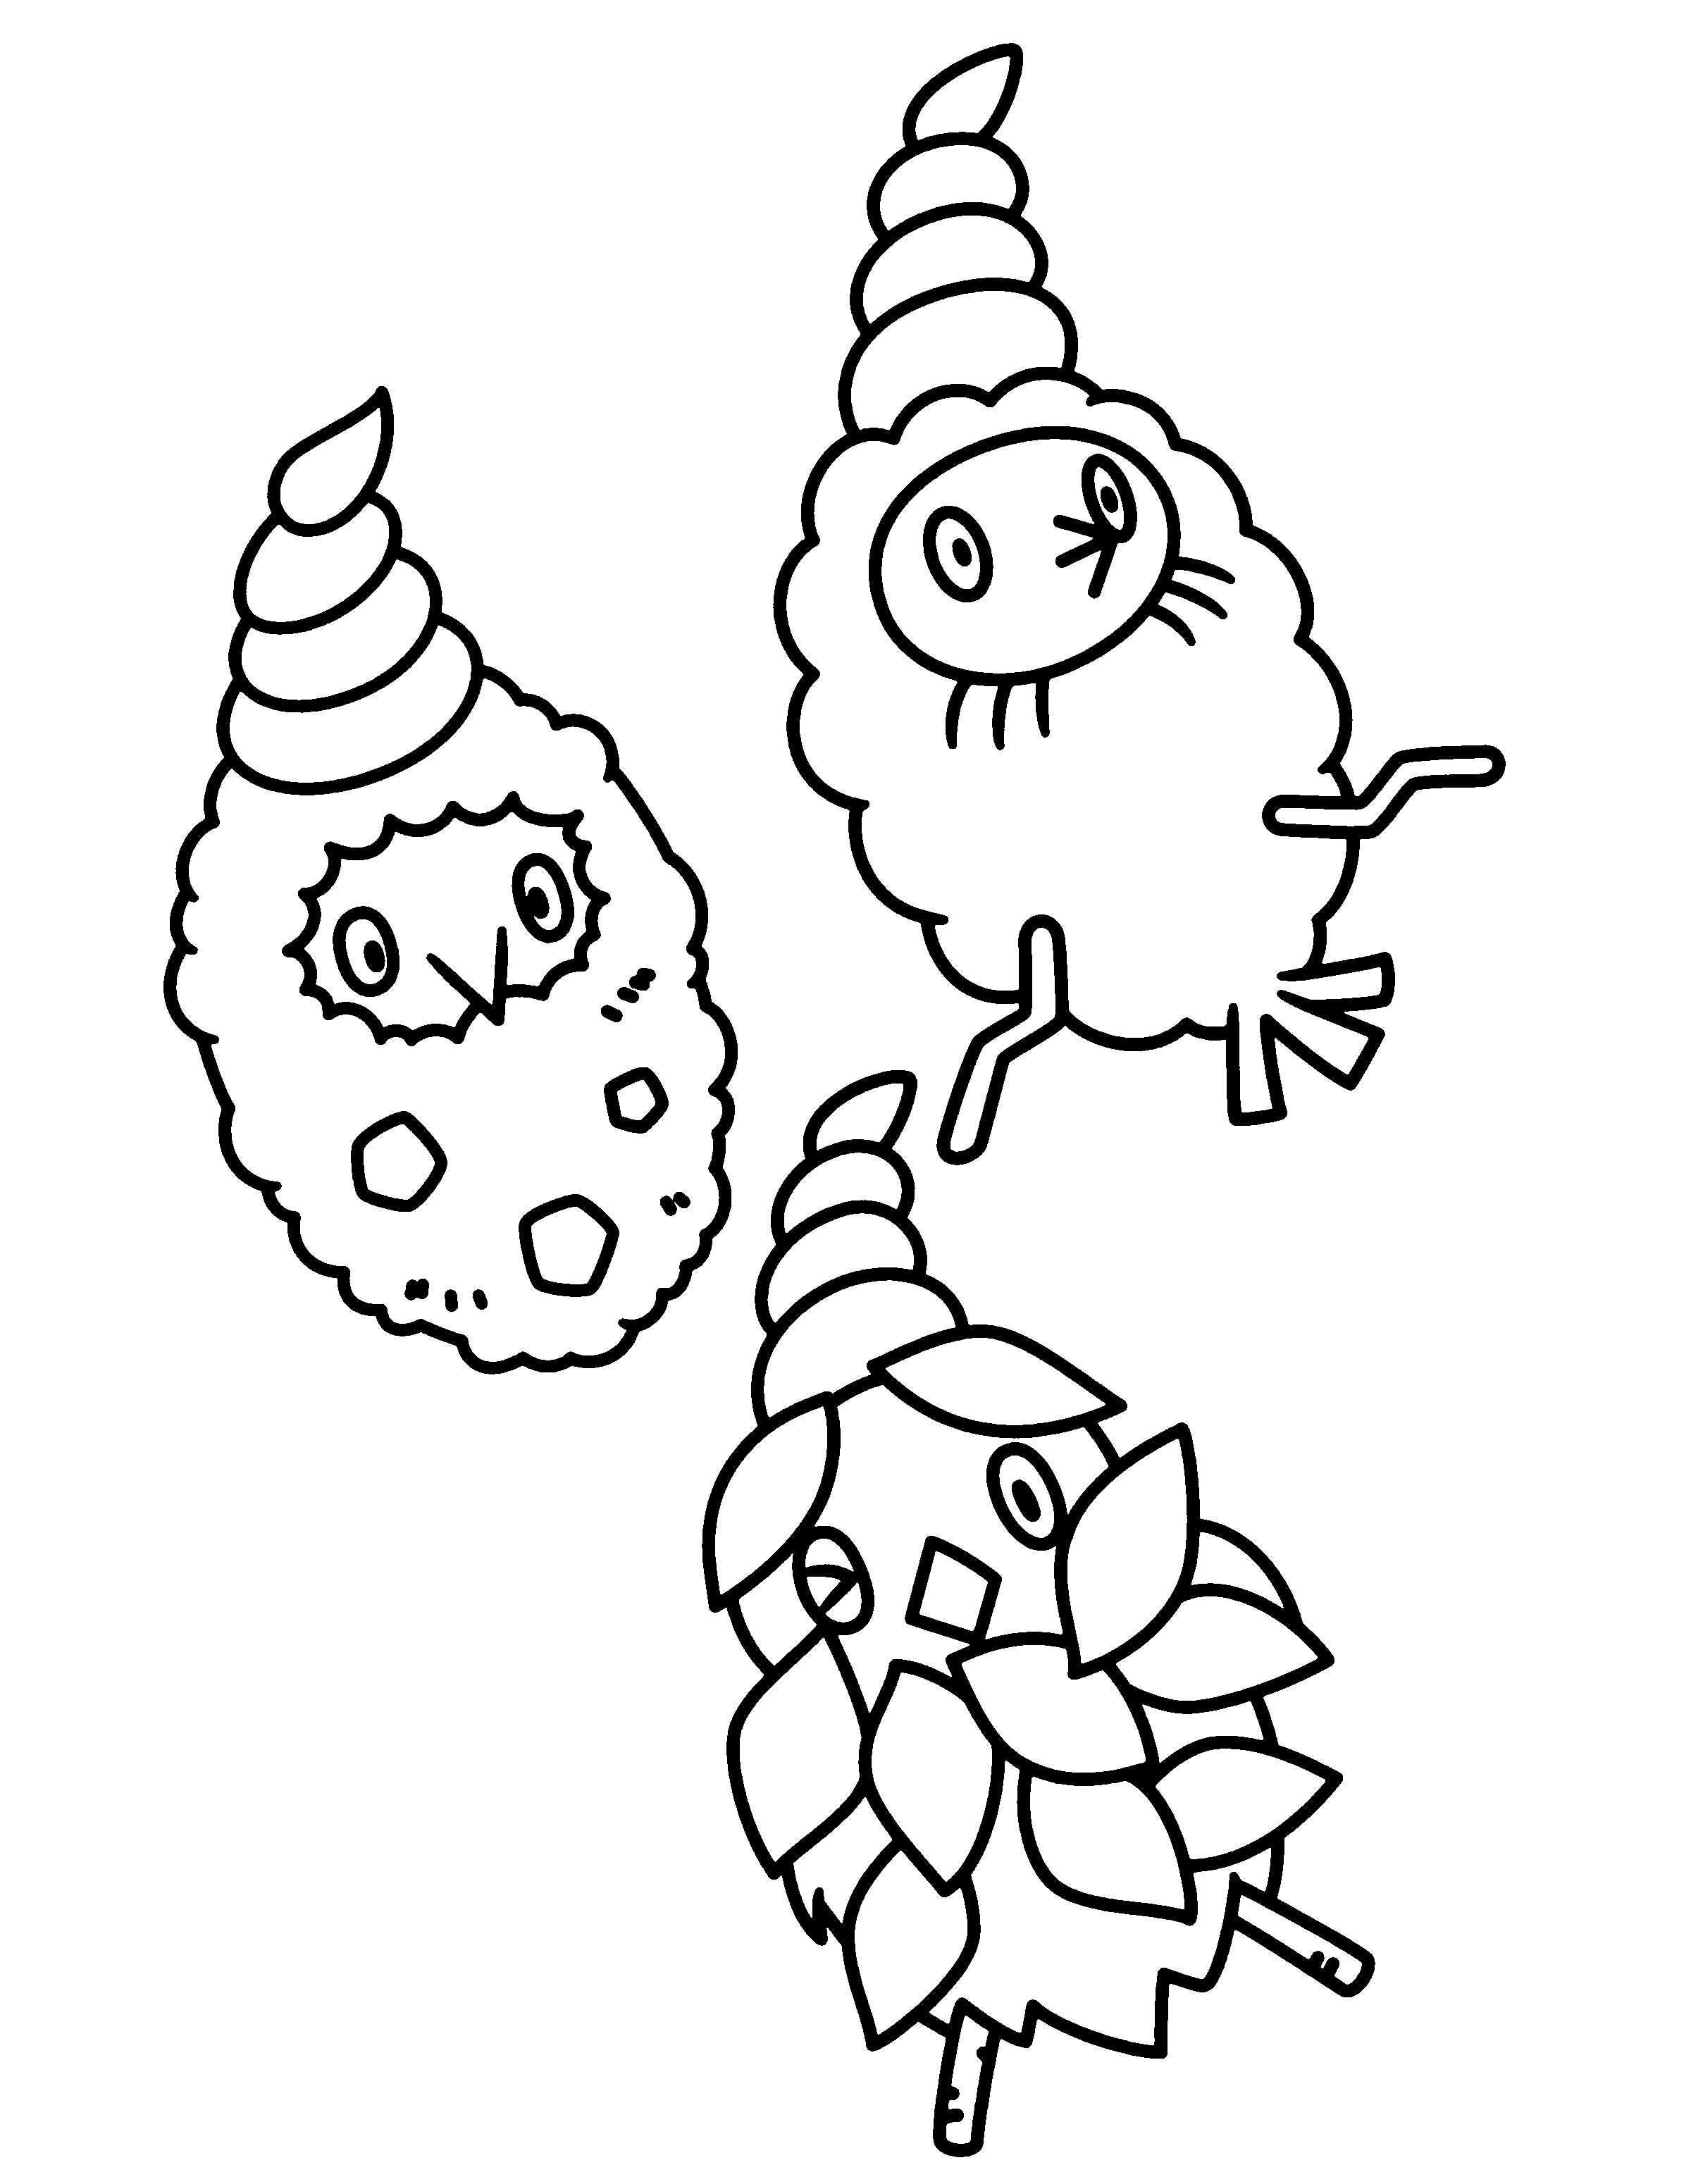 Pokemon diamond pearl coloring pages